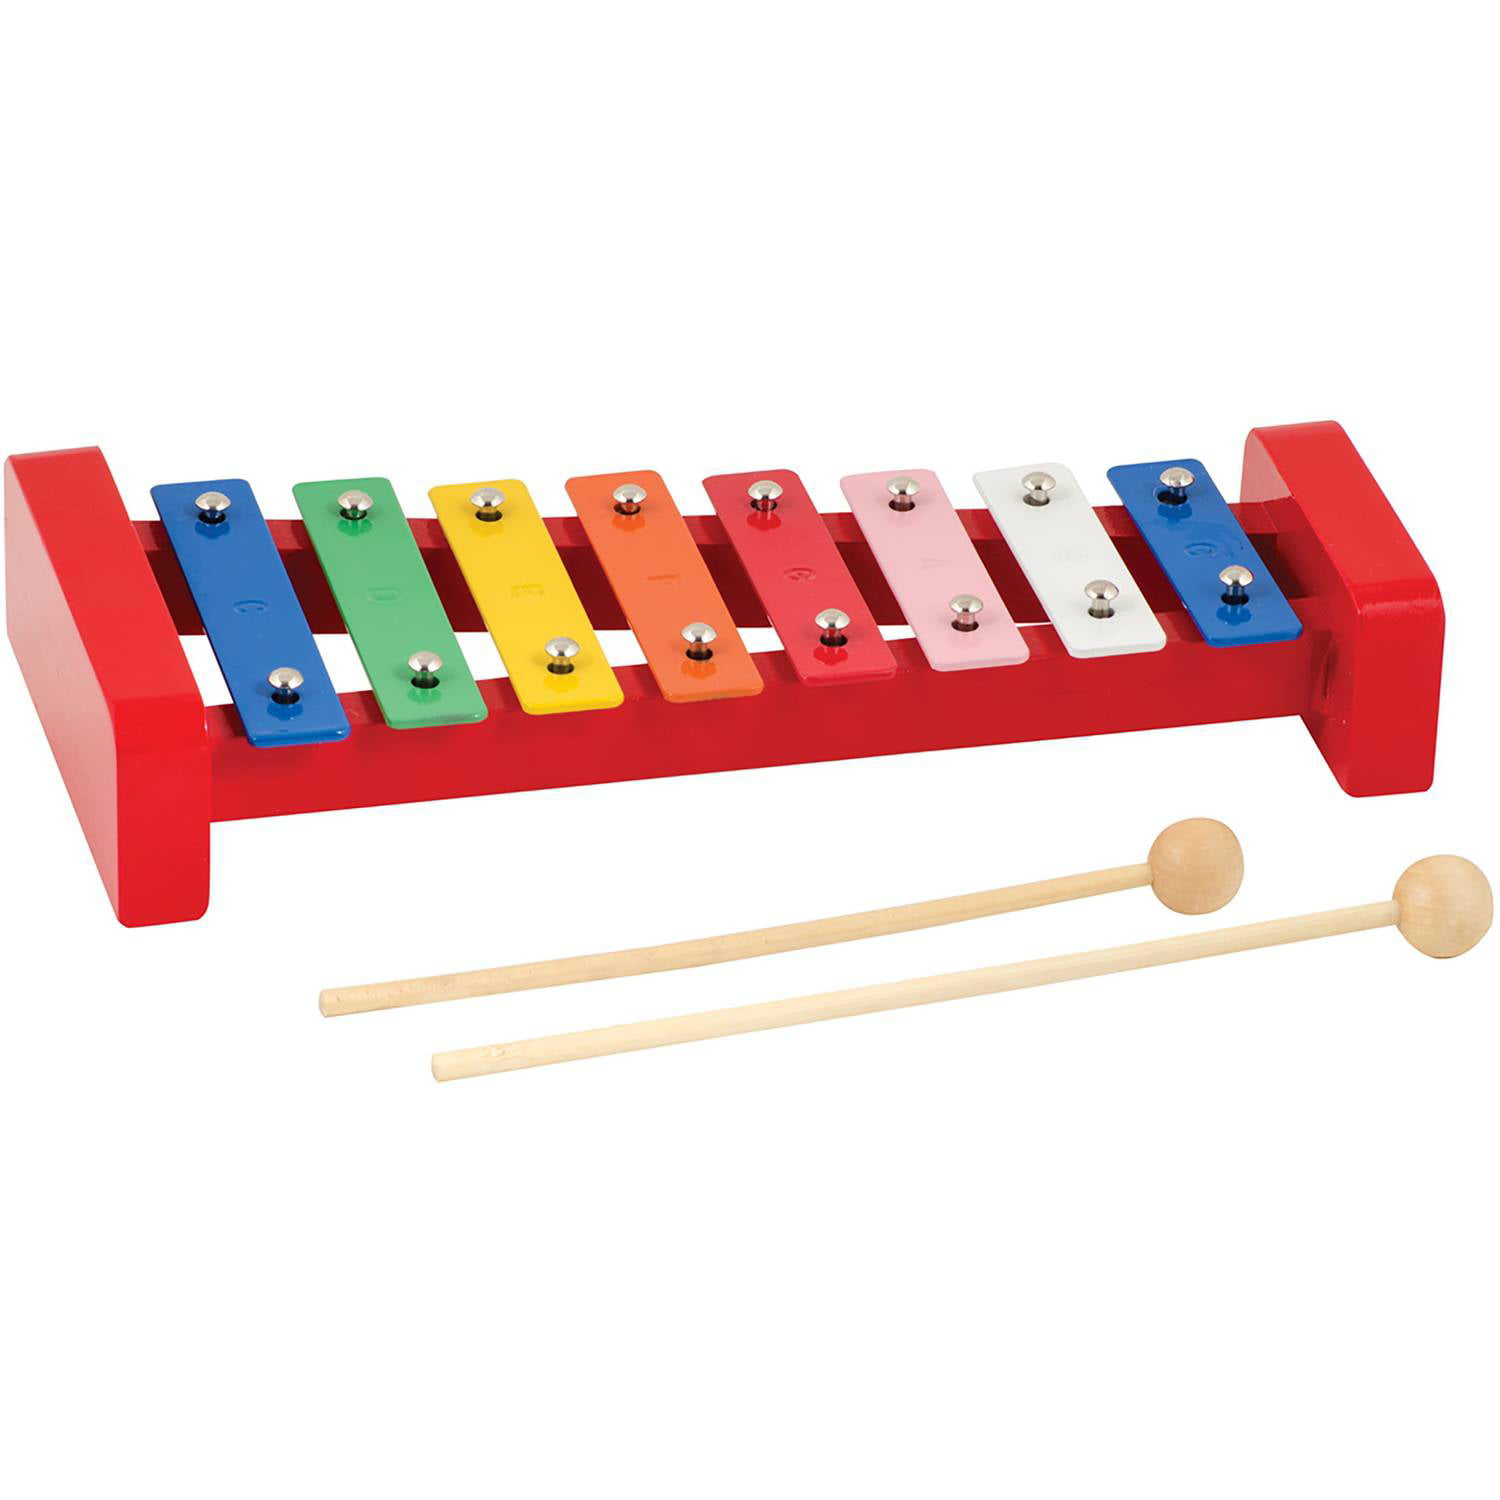 Prettyia 5 Tone Wooden Xylophone Percussion Musical Toy for Toddle Kids 